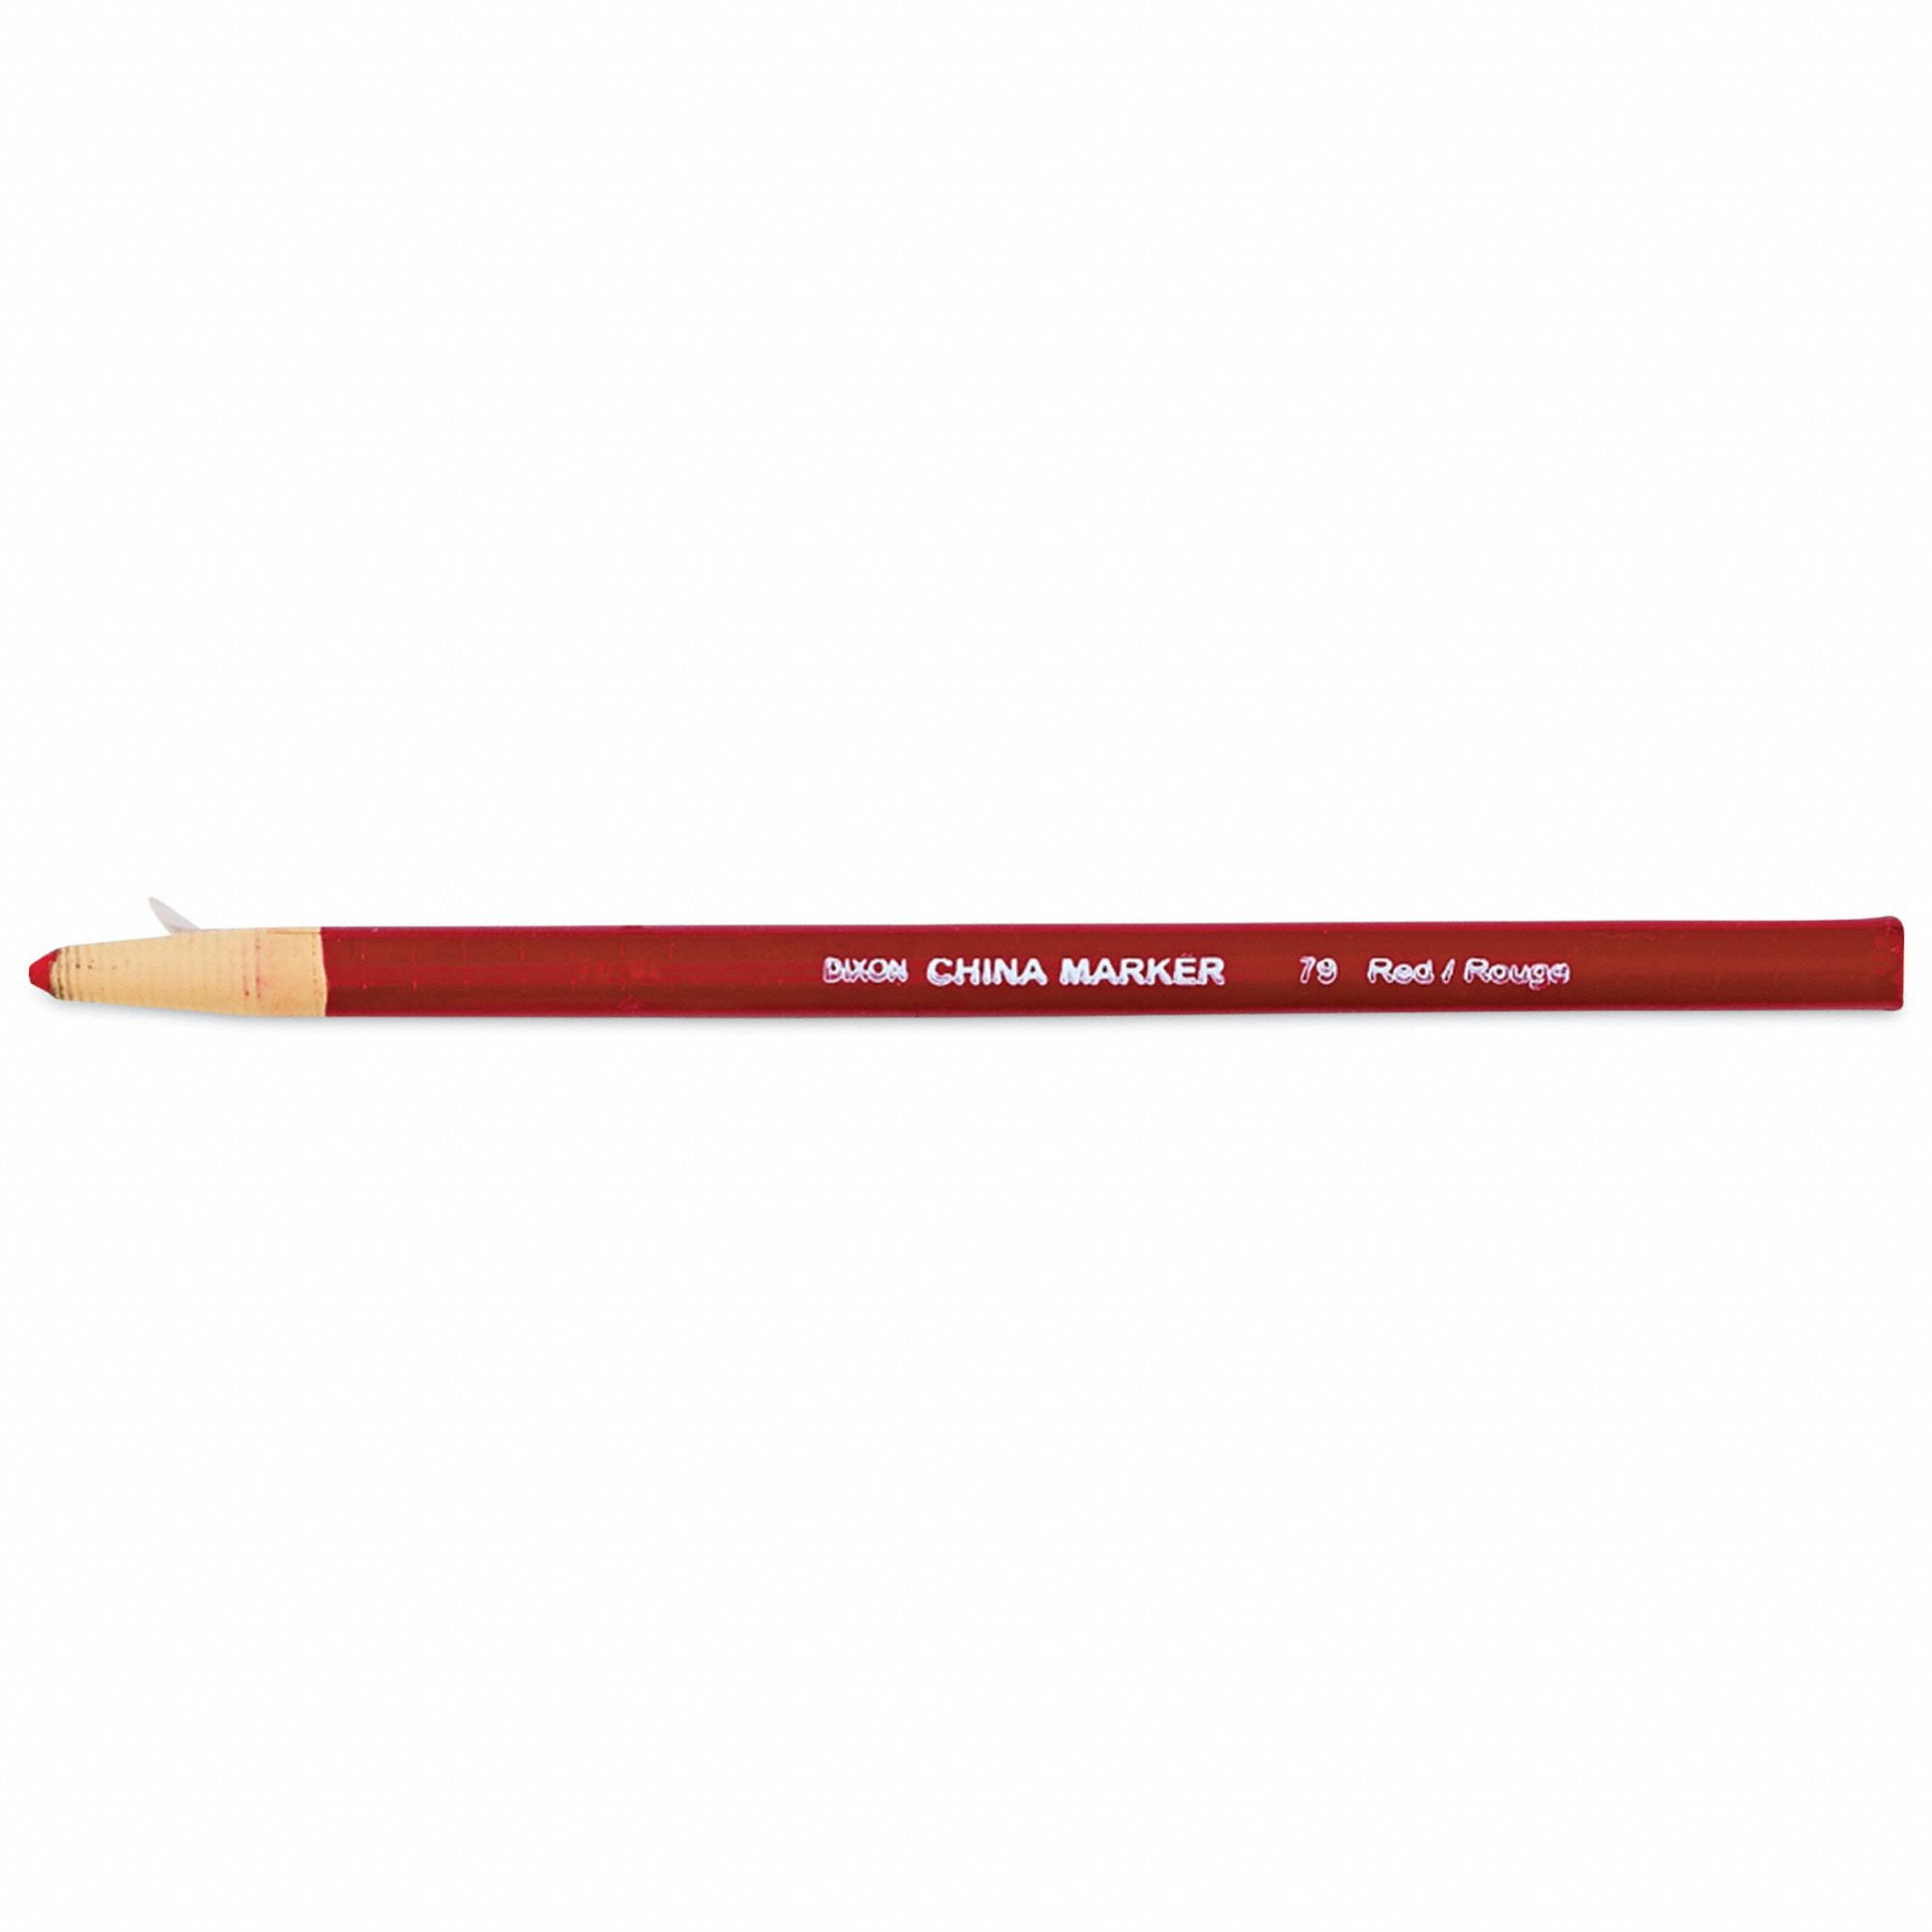 China Marker: Grease Pencil, 1/4 in Tip Wd, Bullet, Red, Wax, Not Refillable, Red, 12 PK